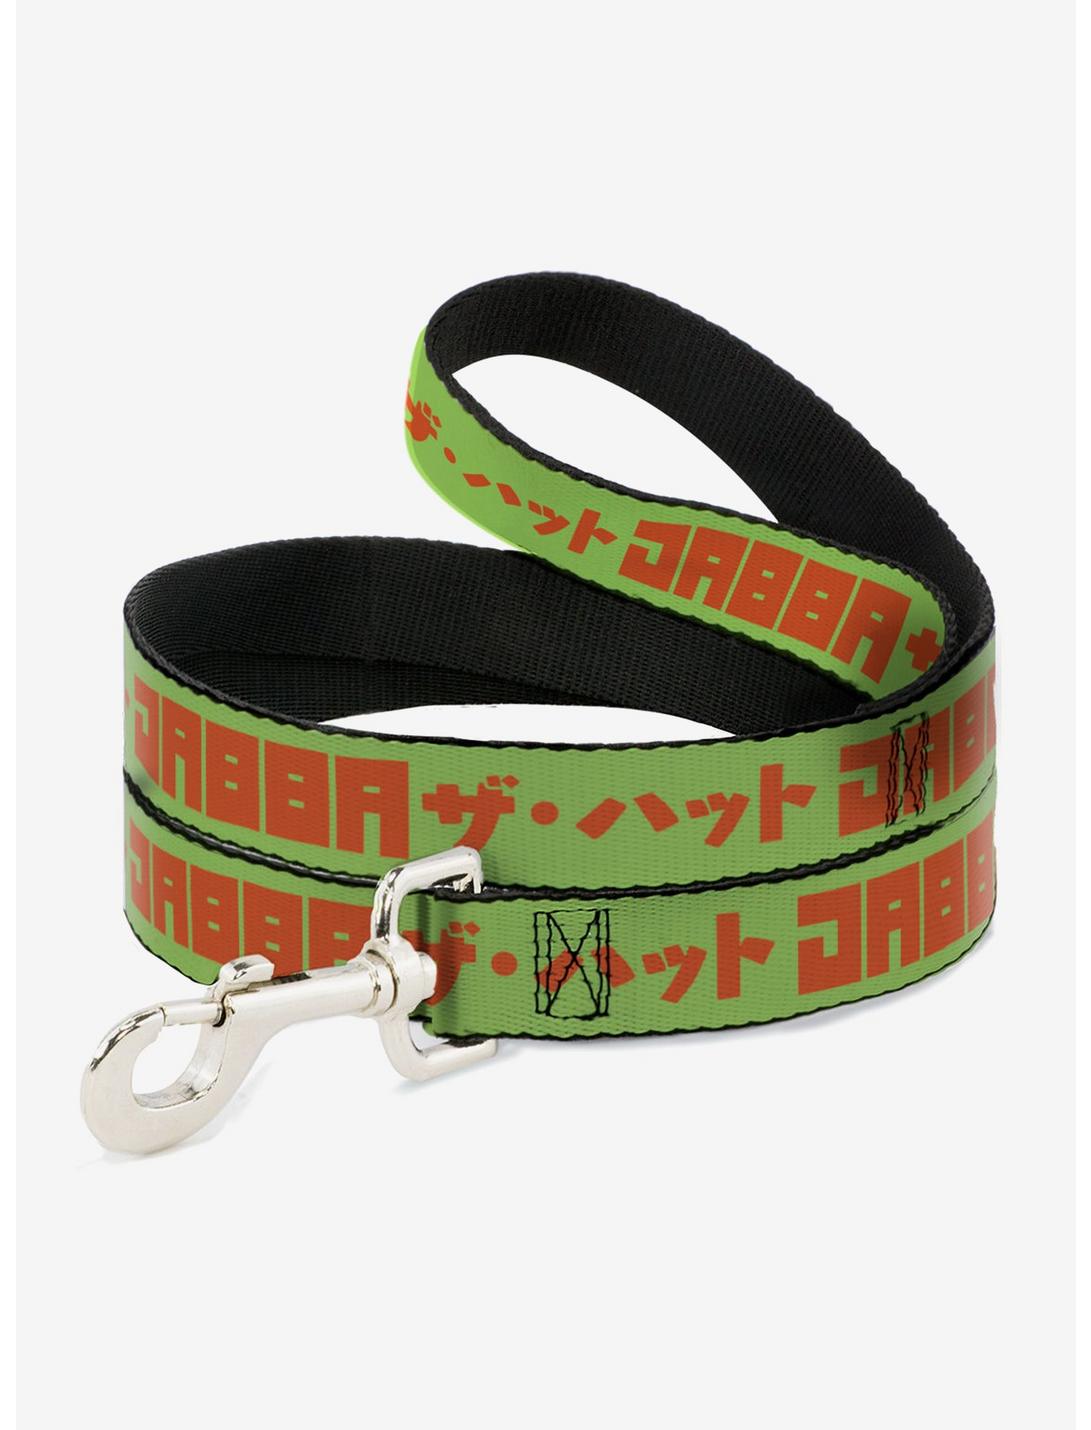 Star Wars Jabba The Hutt Text and Characters Dog Leash, GREEN, hi-res